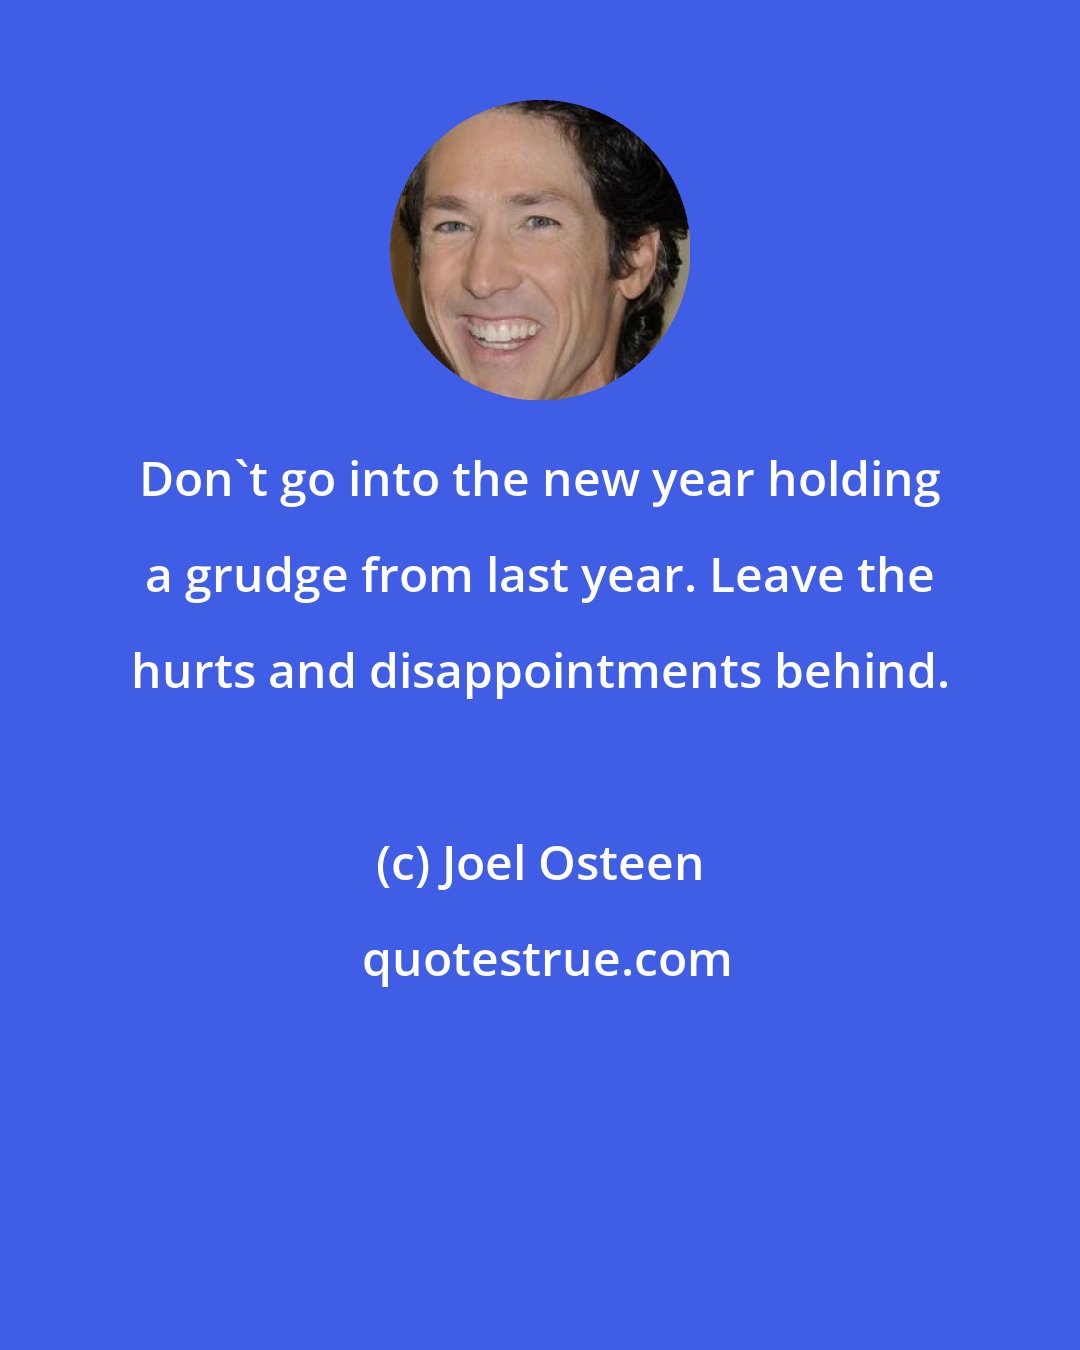 Joel Osteen: Don't go into the new year holding a grudge from last year. Leave the hurts and disappointments behind.